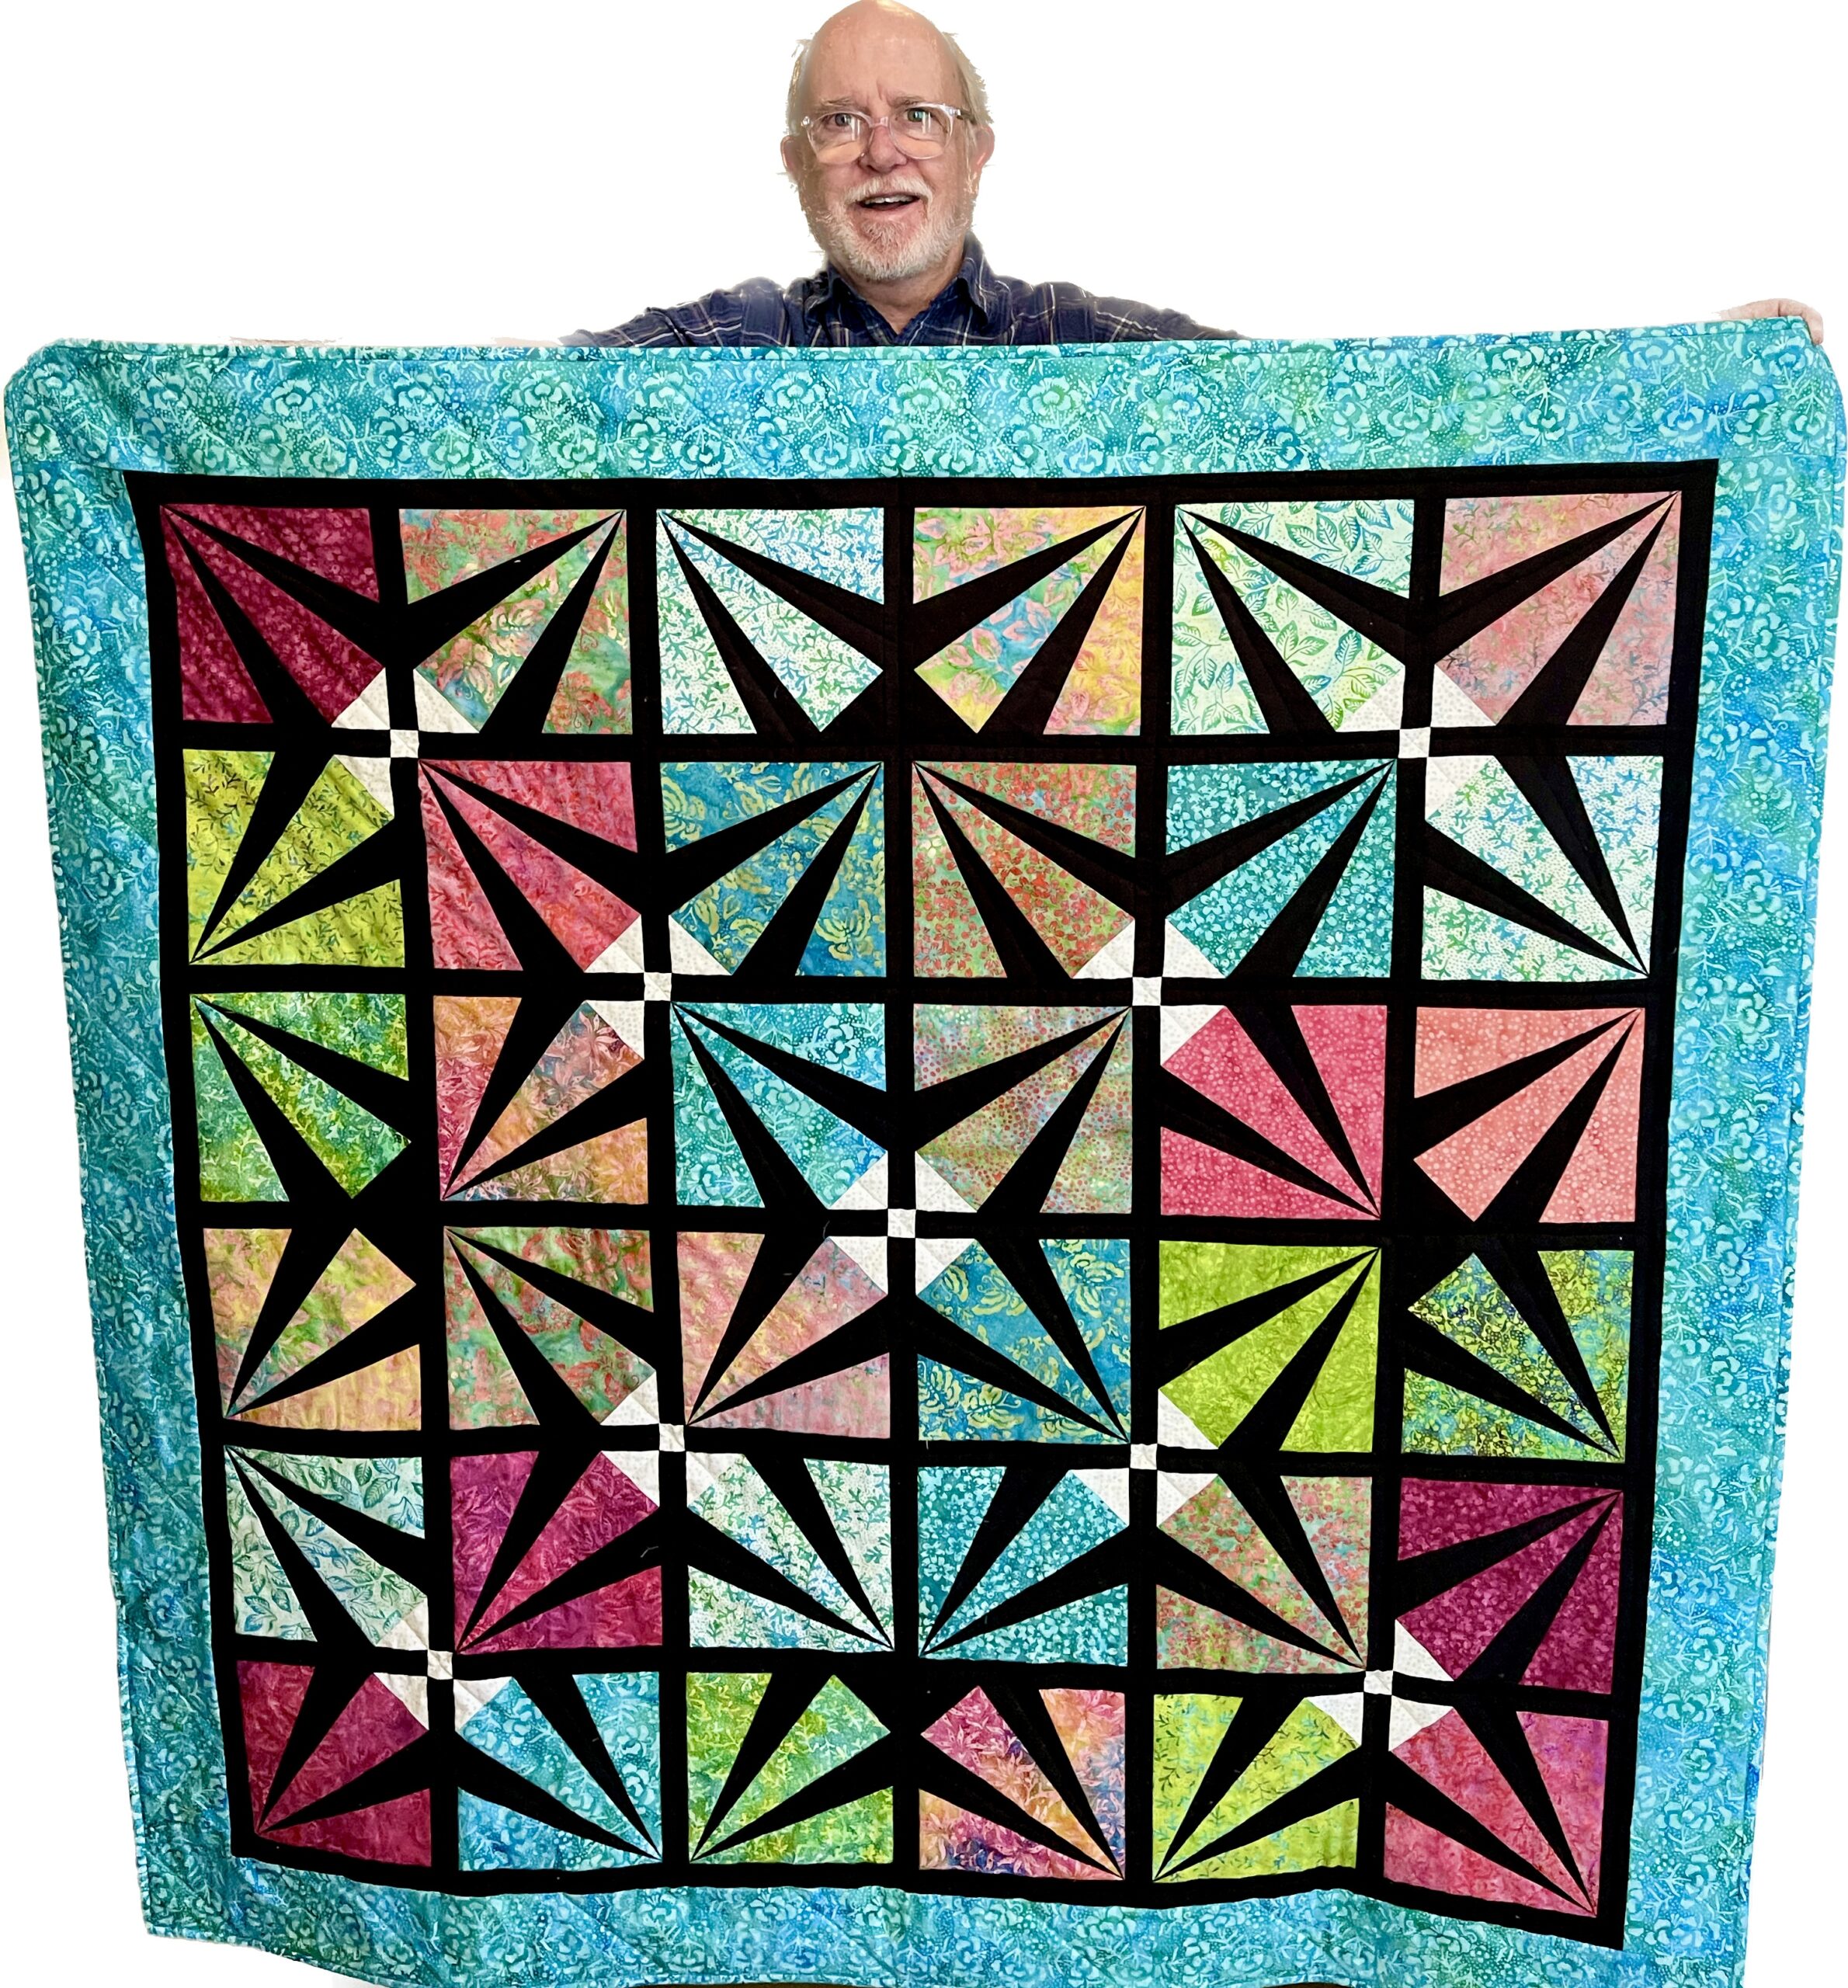 Me with the quilt